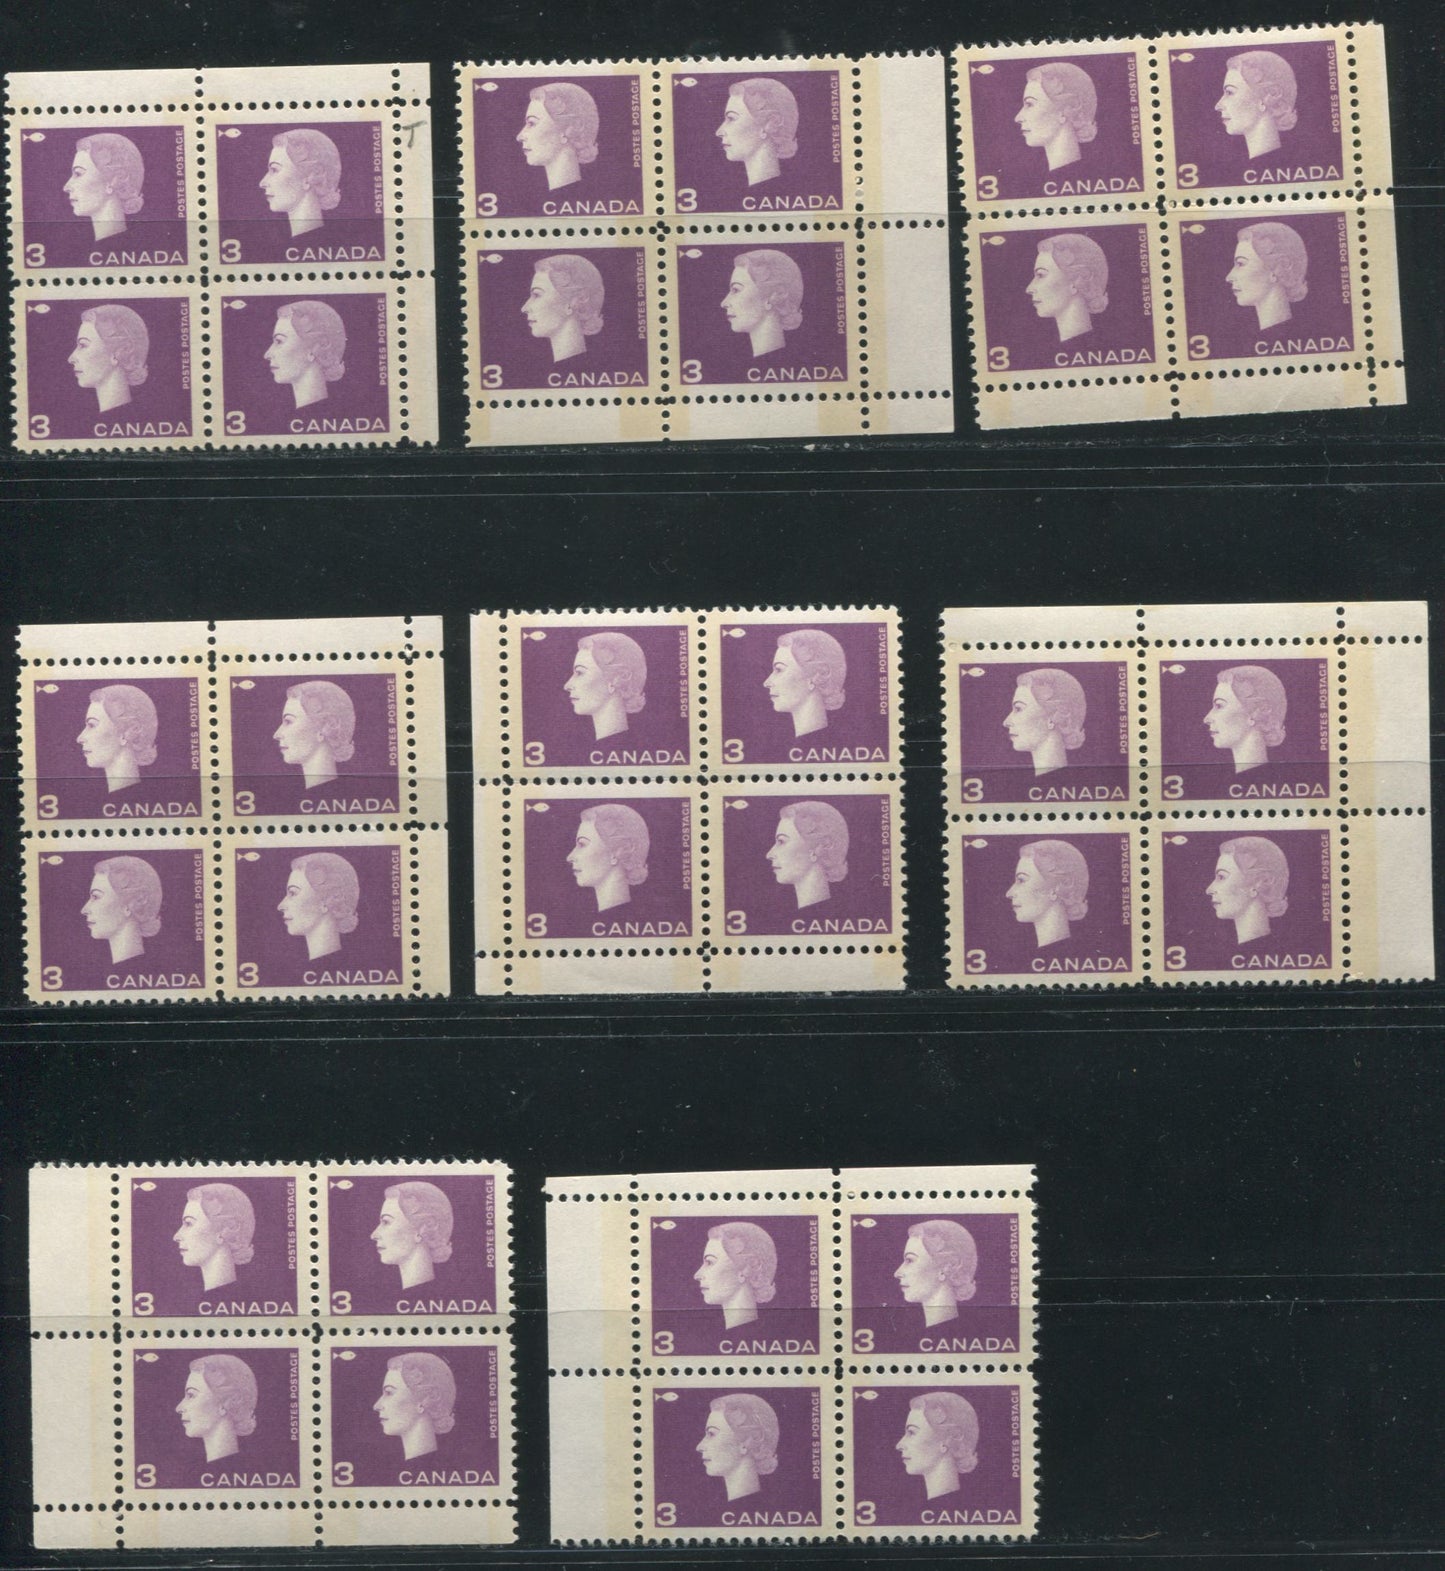 Canada #403p 3c Light Plum Queen Elizabeth II, 1962-1967 Cameo Issue, A Group of 8 VF Mostly All NH Winnipeg Tagged Field Stock Corner Blocks With Different Selvedge Widths and Different Tagging Strengths